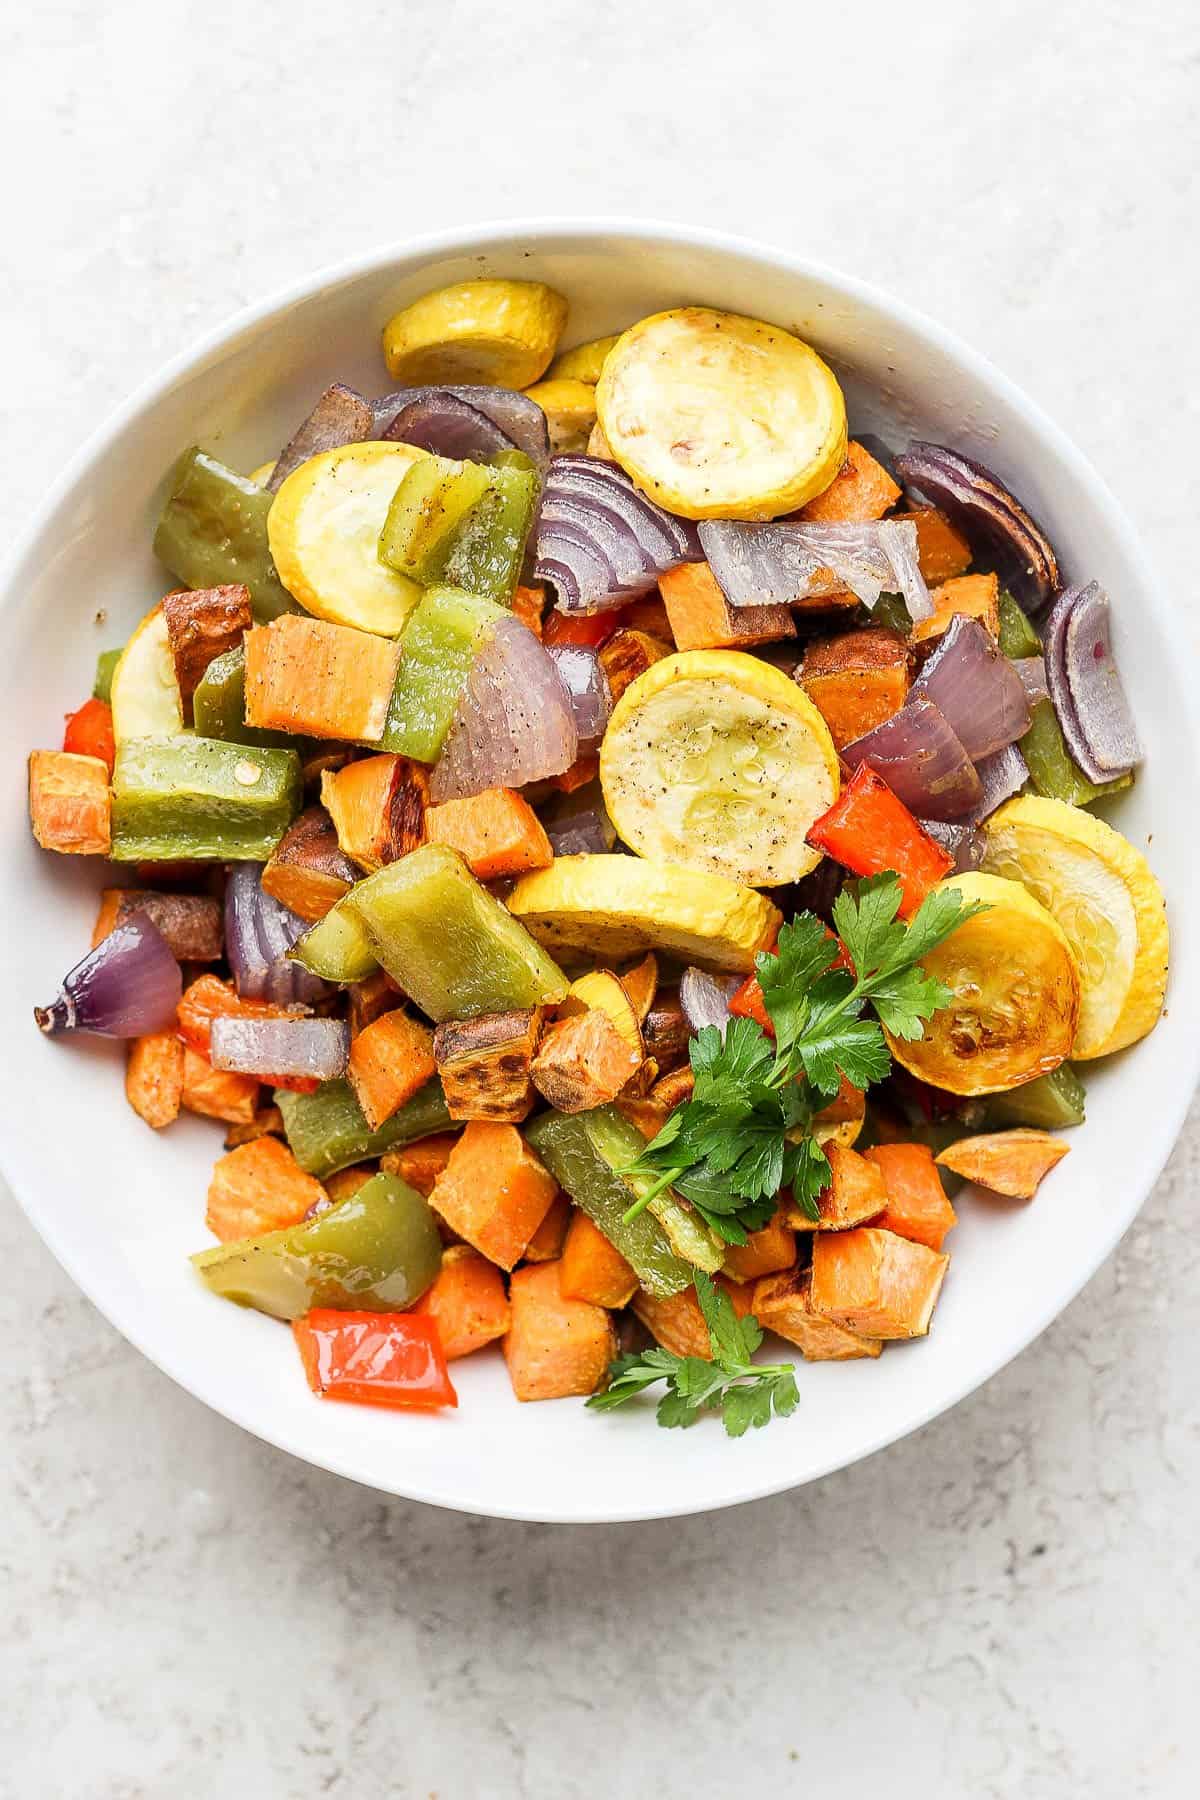 Roasted vegetables in a round bowl with parsley on top